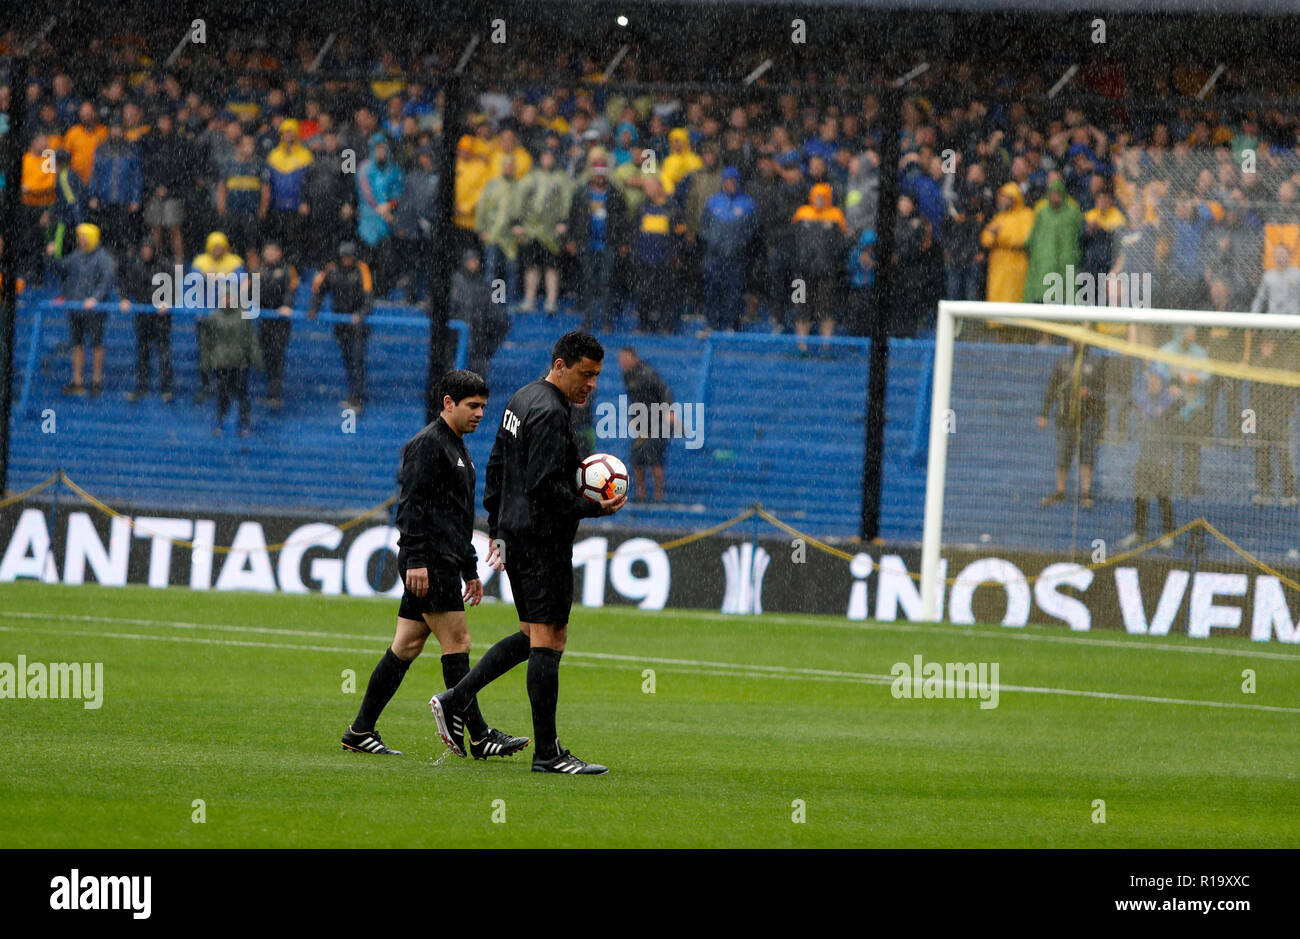 Buenos Aires, Argentina. 10th Nov, 2018. Chilean referee Roberto Tobar (r) crosses the pitch at Boca Juniors La Bombonera stadium. The first leg of the Copa Libertadores final between Boca Juniors and River Plate has been postponed due to pouring rain. The first big Argentine final of the South American Champions League will take place on Sunday 11.11.2018. Credit: Ortiz Gustavo/dpa/Alamy Live News Stock Photo